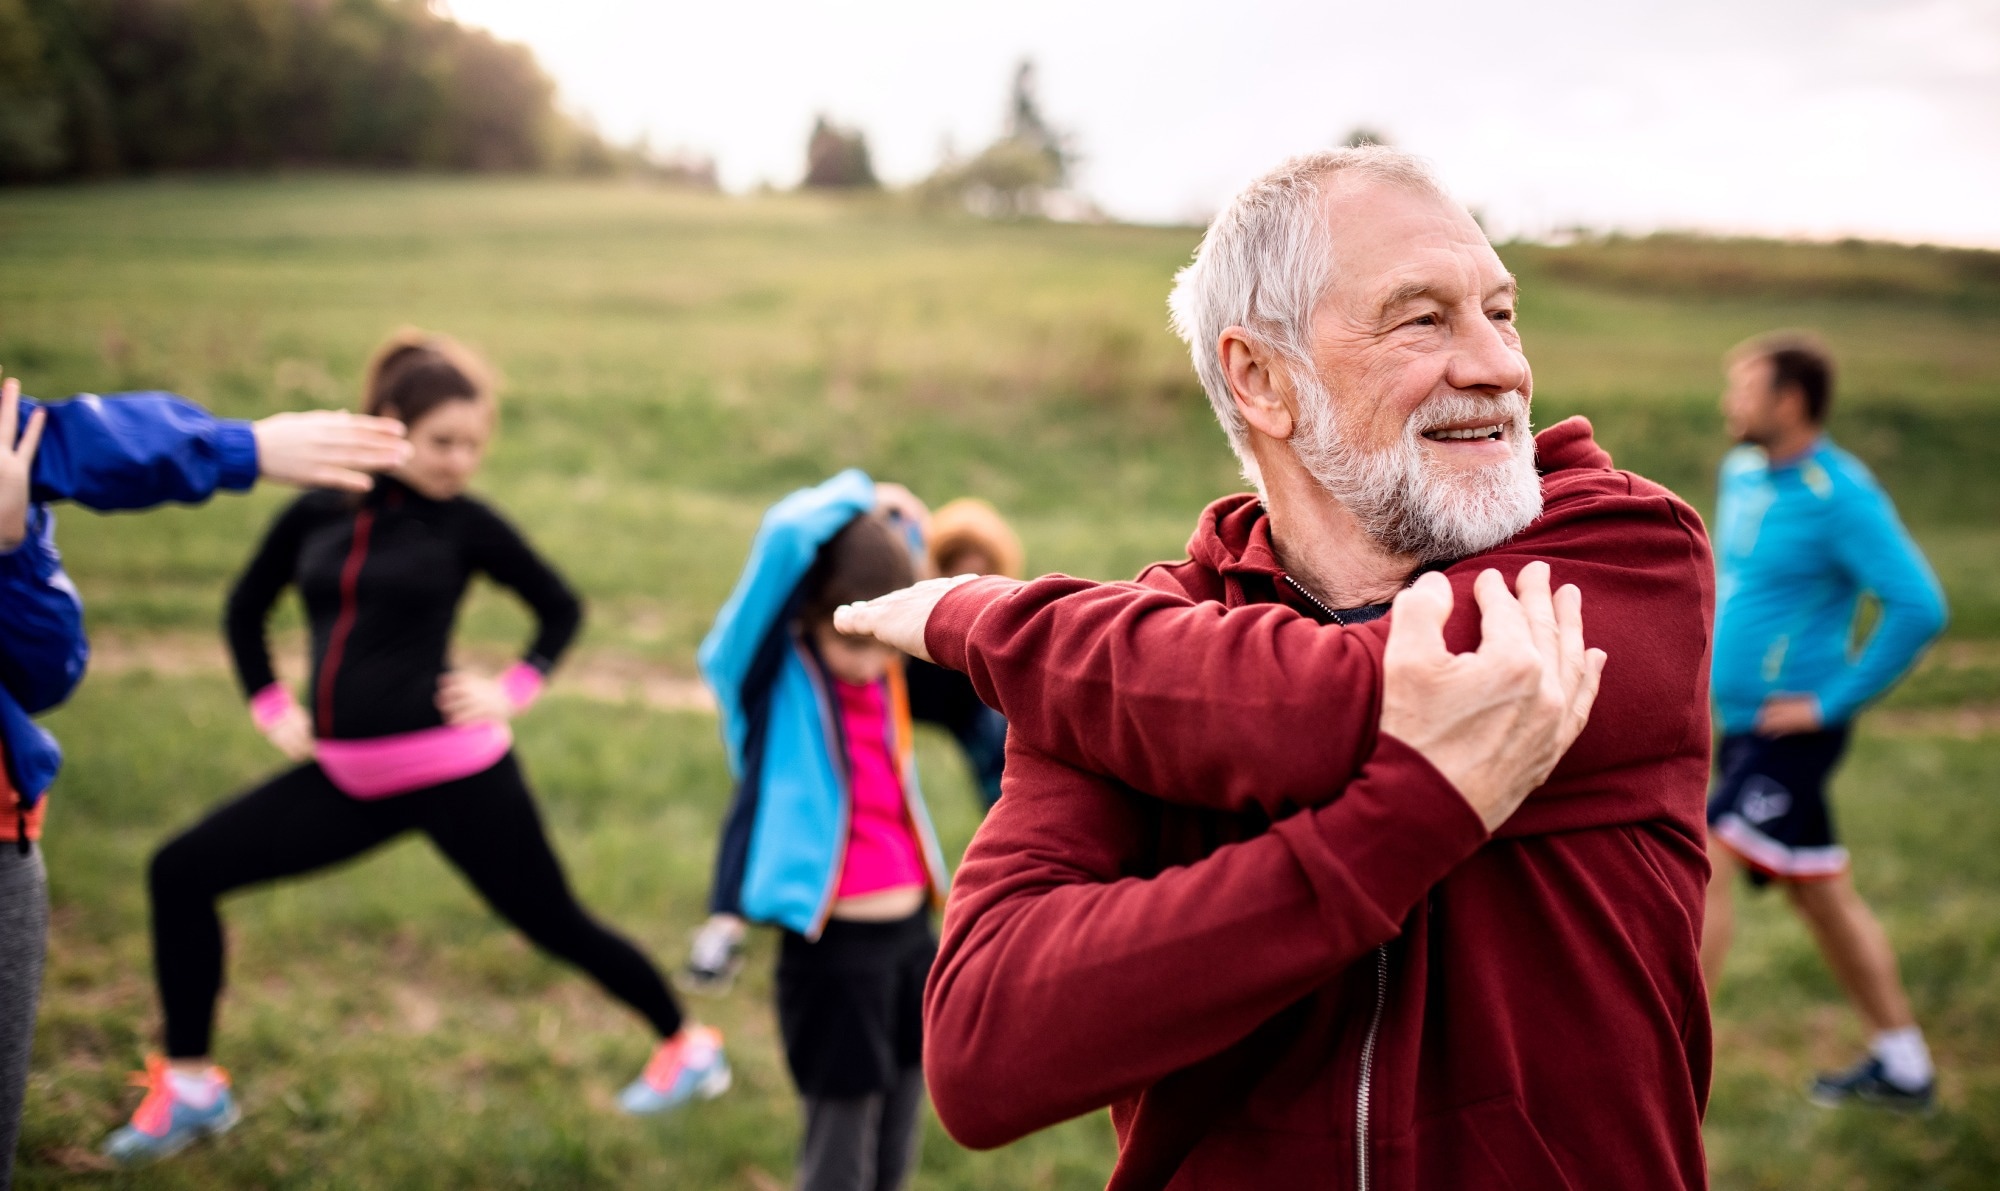 Study: Regular exercise delays microvascular endothelial dysfunction by regulating antioxidant capacity and cellular metabolism. Image Credit: Ground Picture/Shutterstock.com